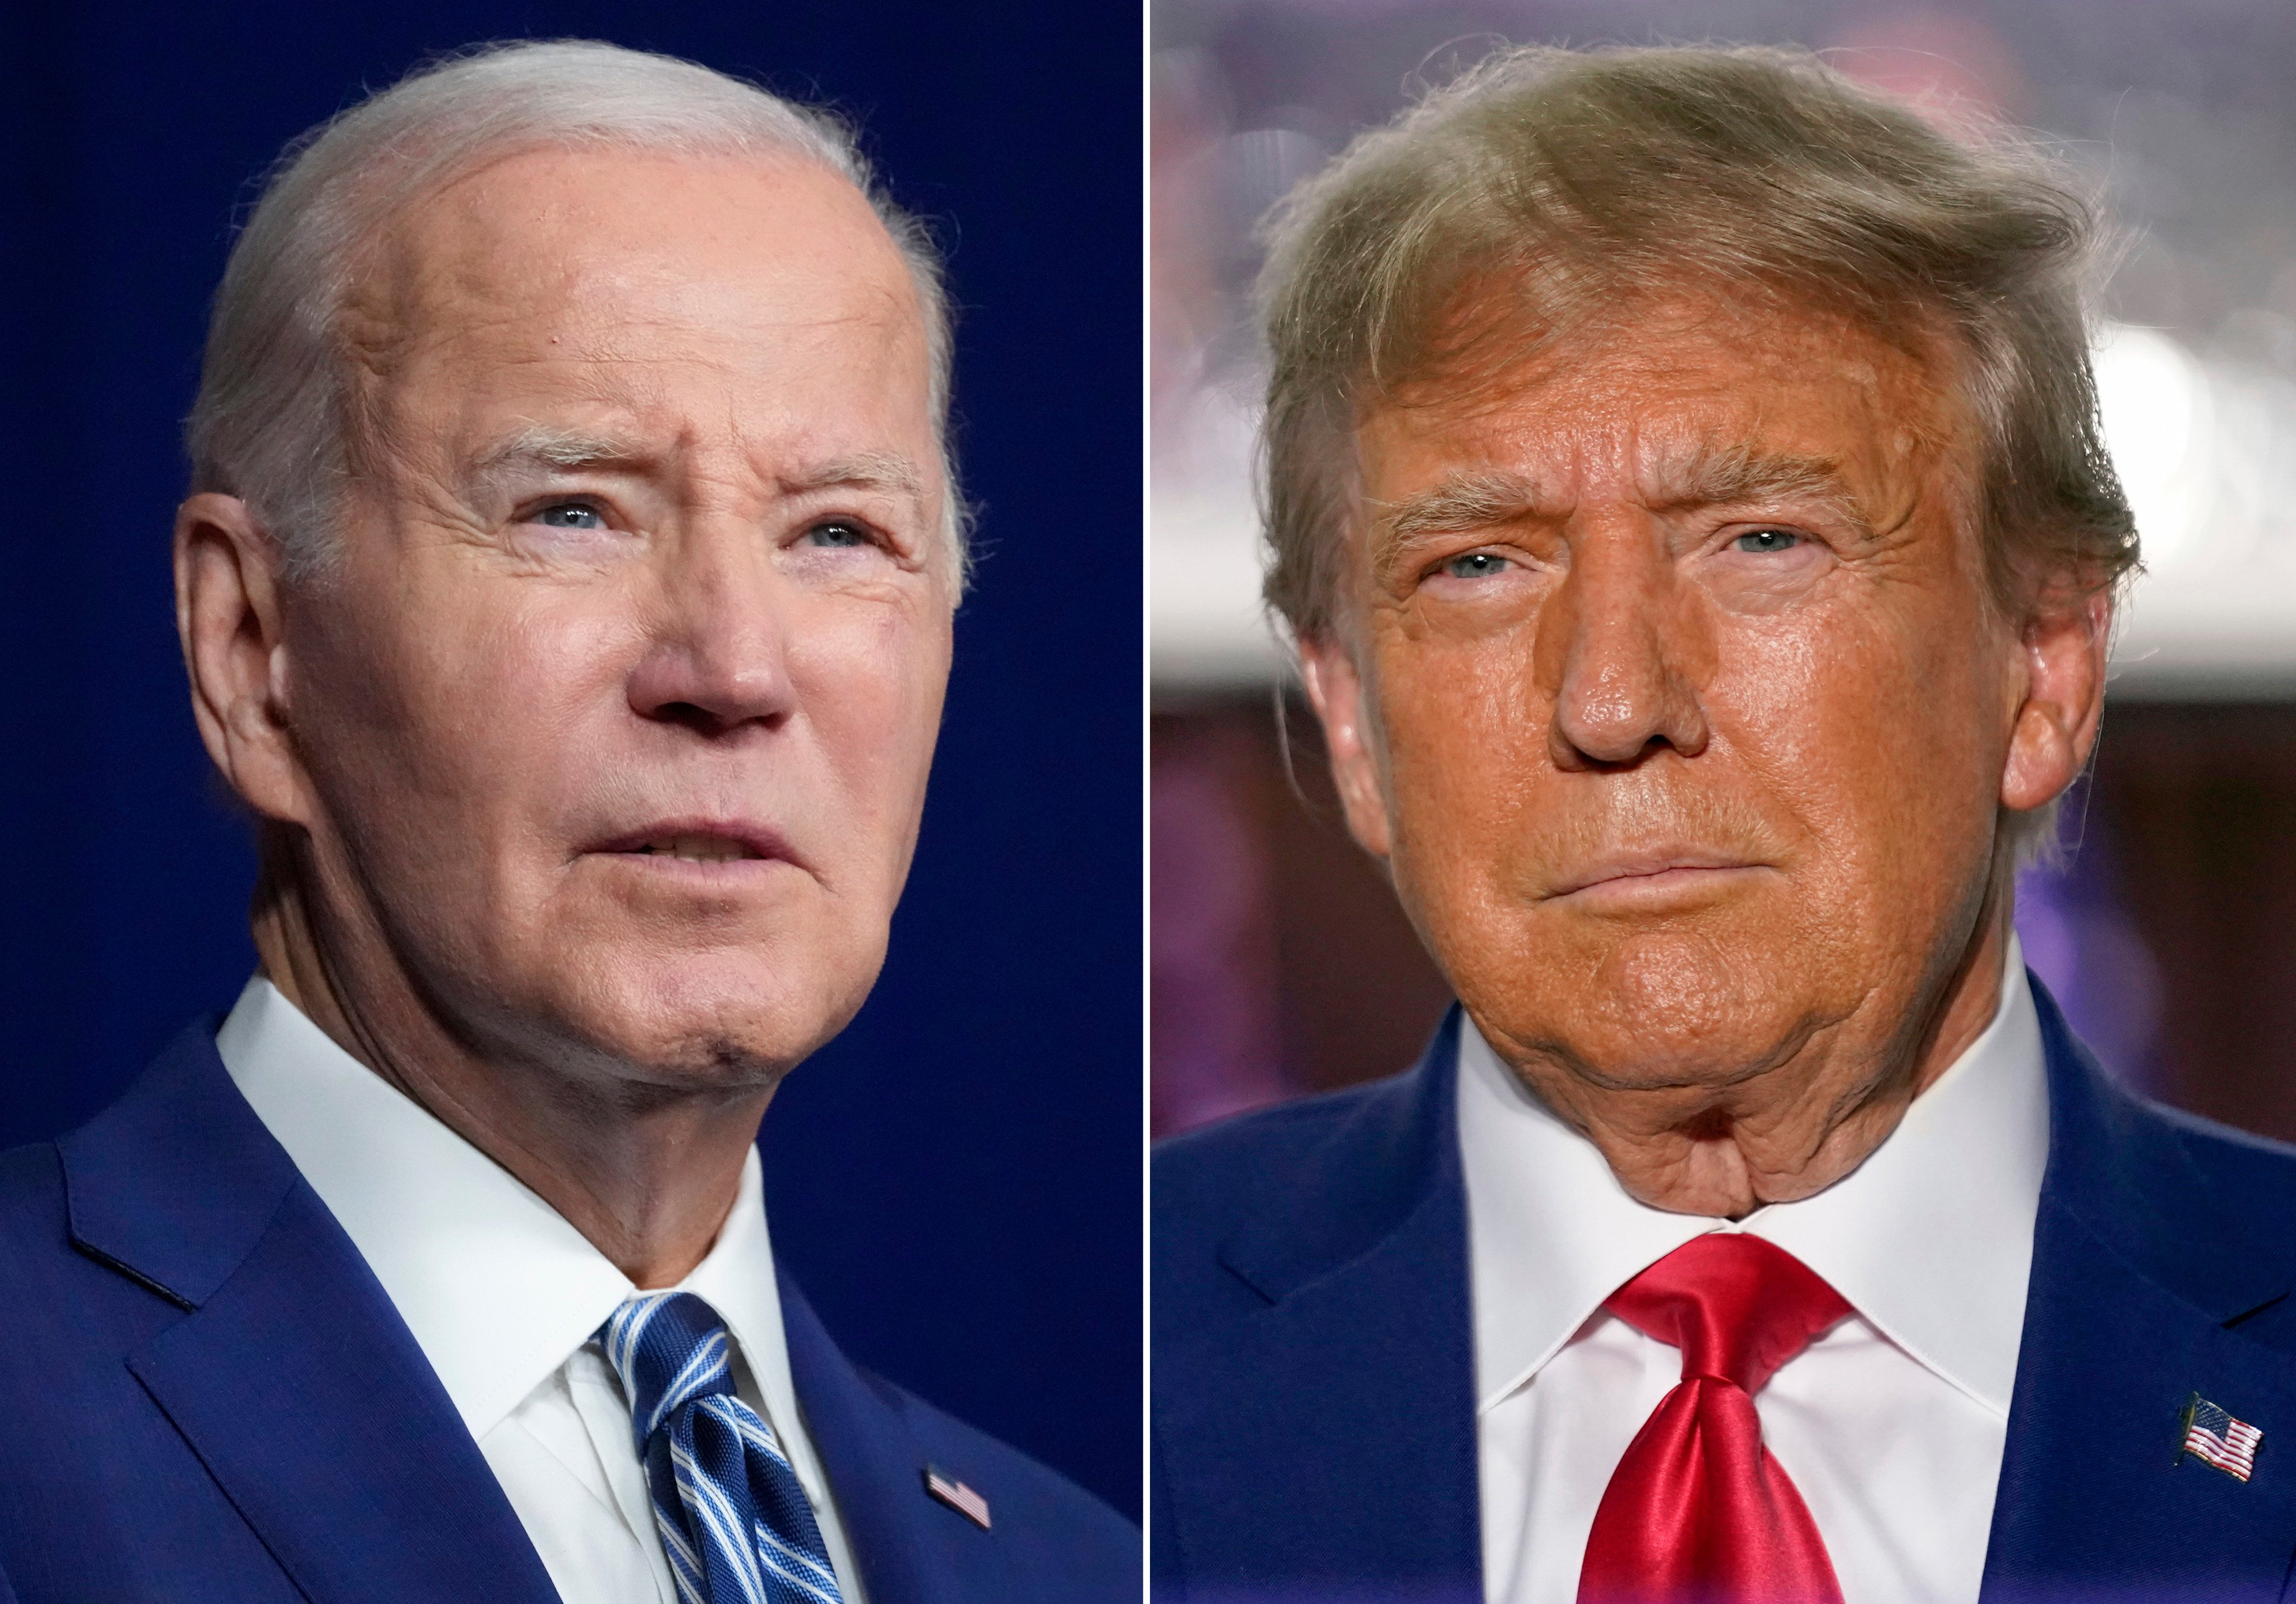 A new Reuters/Ipsos poll finds that Joe Biden has a 1 point lead over Donald Trump in the race to the White House. Photo: AP